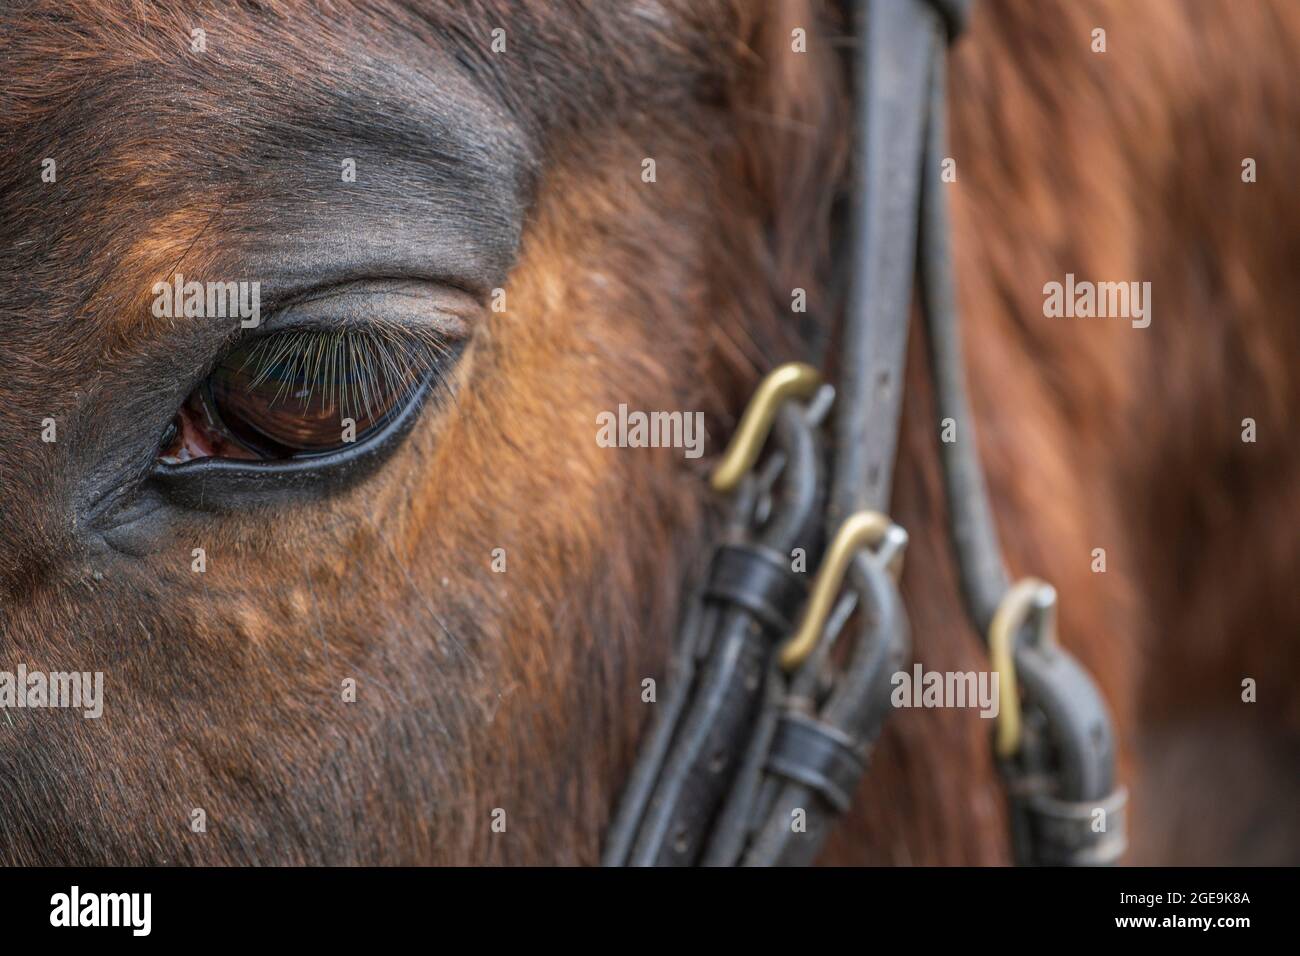 Close up of a horses eye and bridle. Stock Photo